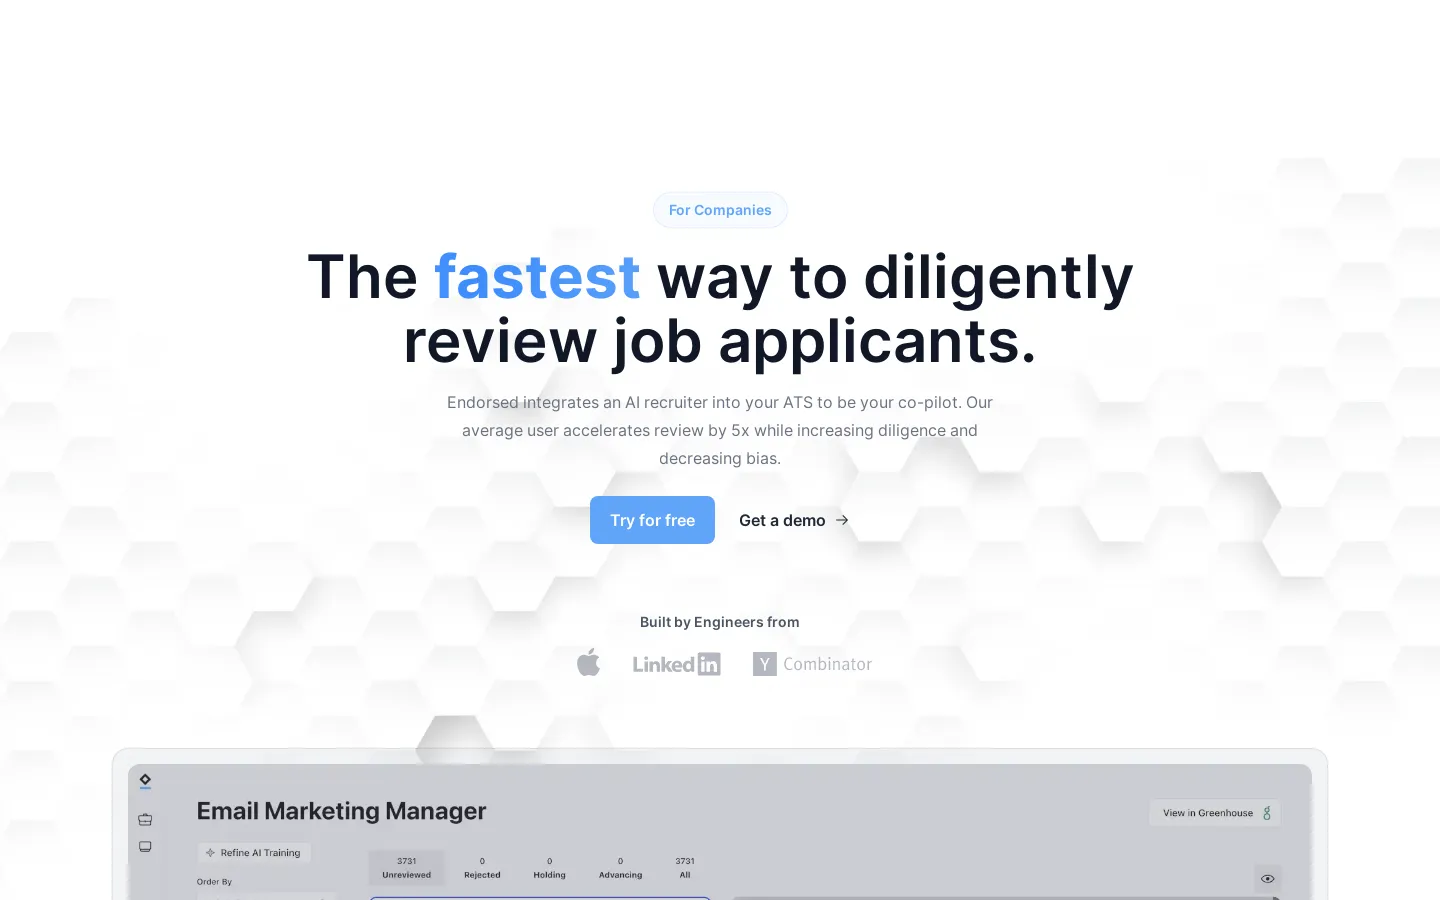 The fastest way to diligently review job applicants | Endorsed